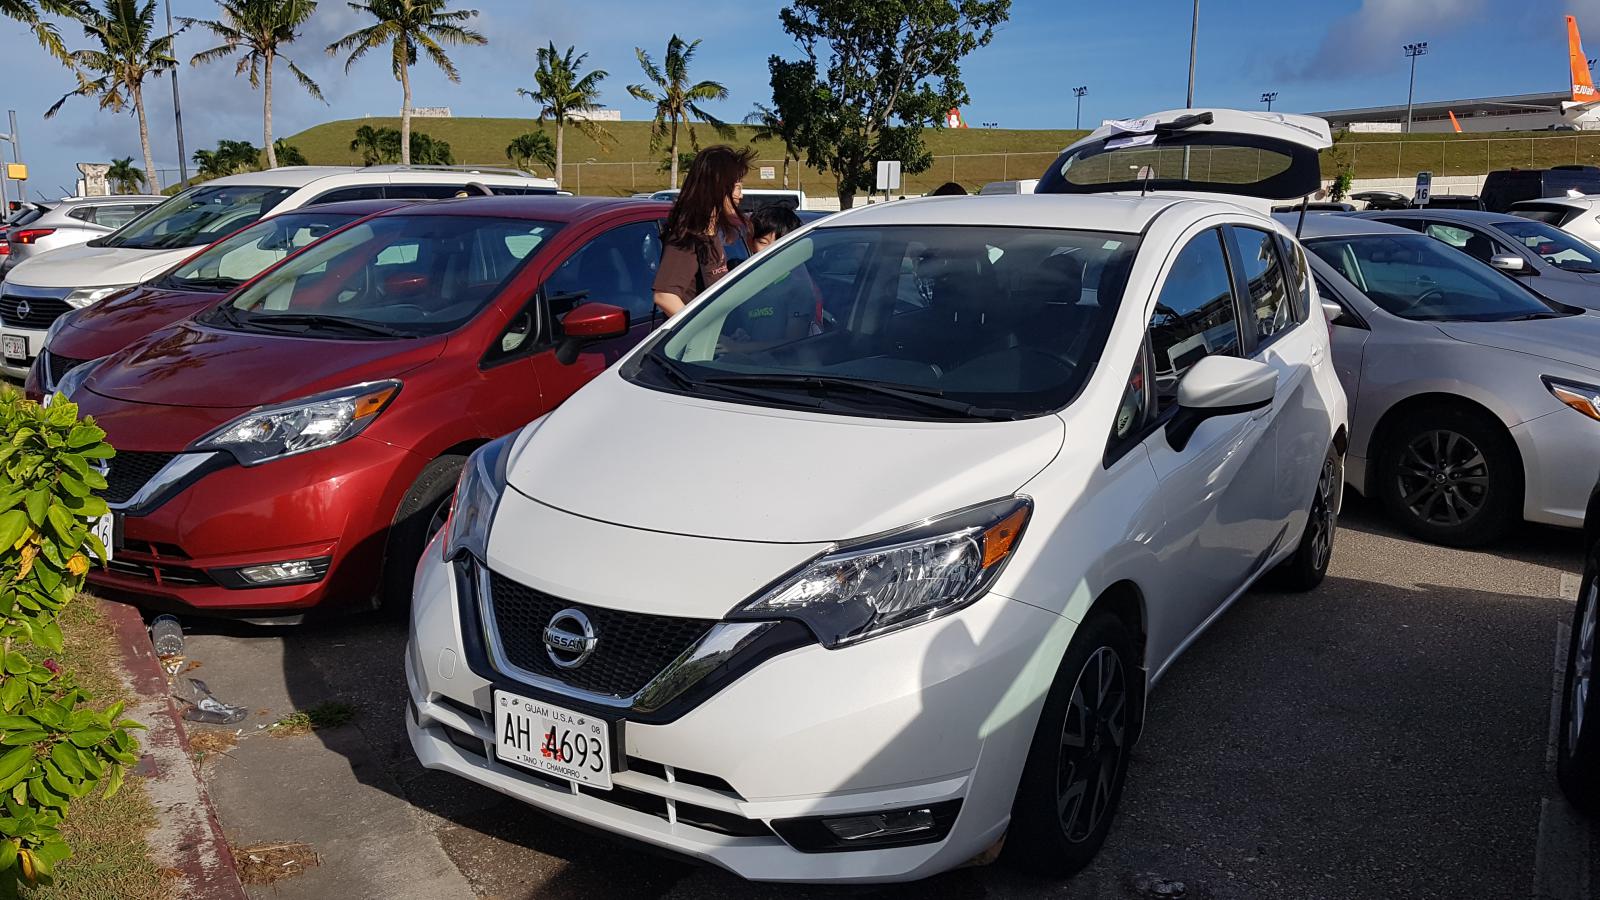 Duration: December 29, 2019-January 02, 2020 (4 nights and 5 days) Model: Nissan Versa Amount: 33 $ / day After ticketing with a mileage ticket, I found a rental car around here and found it to be the cheapest I'm going to rent a car. Pros and cons were well described in the reviews of the users, most of all, the cost ratio is the best. Check-in at the airport was done in five minutes because I did the Express Check-in first. The delivery of the car was quick and fast. The appearance was clean and the interior was clean. (The procedure time and the car condition were very good.) I was worried that we were lucky. The white Versa which was our comfortable feet was very good. Thanks to the free wifi egg, I did not have any problem with laying the waze app. It's a tea that doesn't eat oil, but it's easy to return it with the Free gas option. I don't know when to go to Guam again, but I think I'll be there again. Thank you.